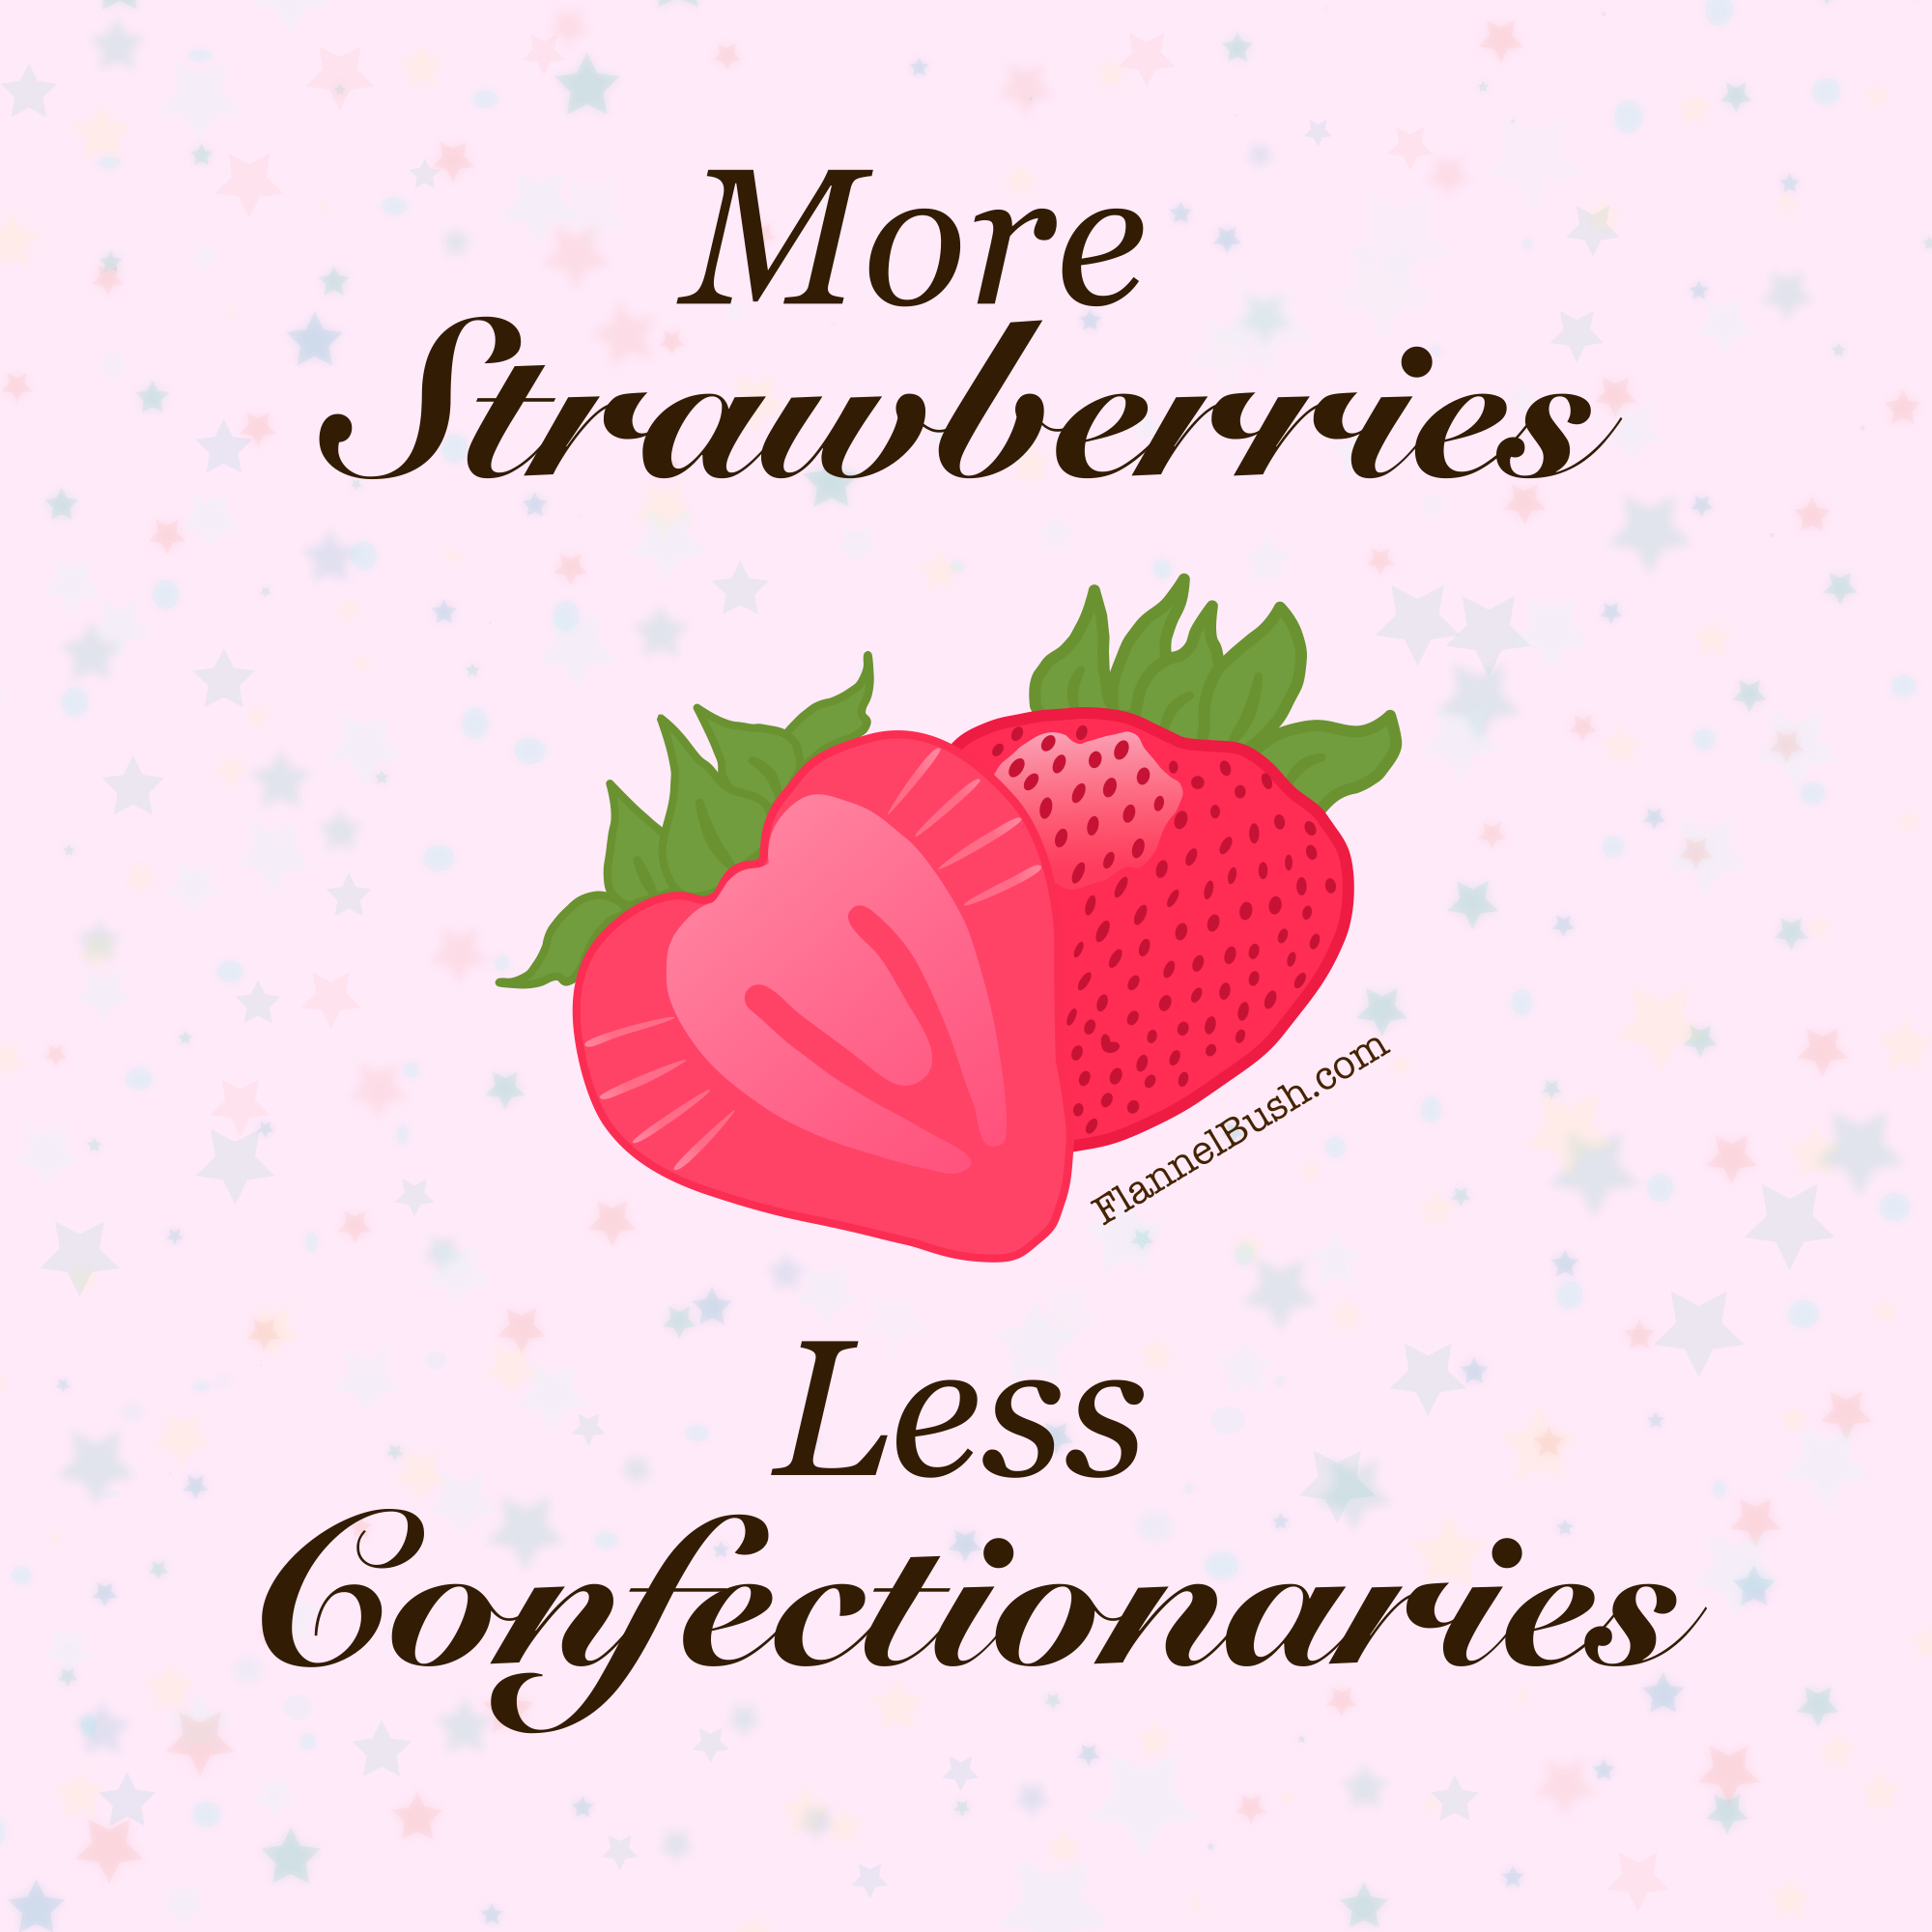 More Strawberries ; Less Confectionaries